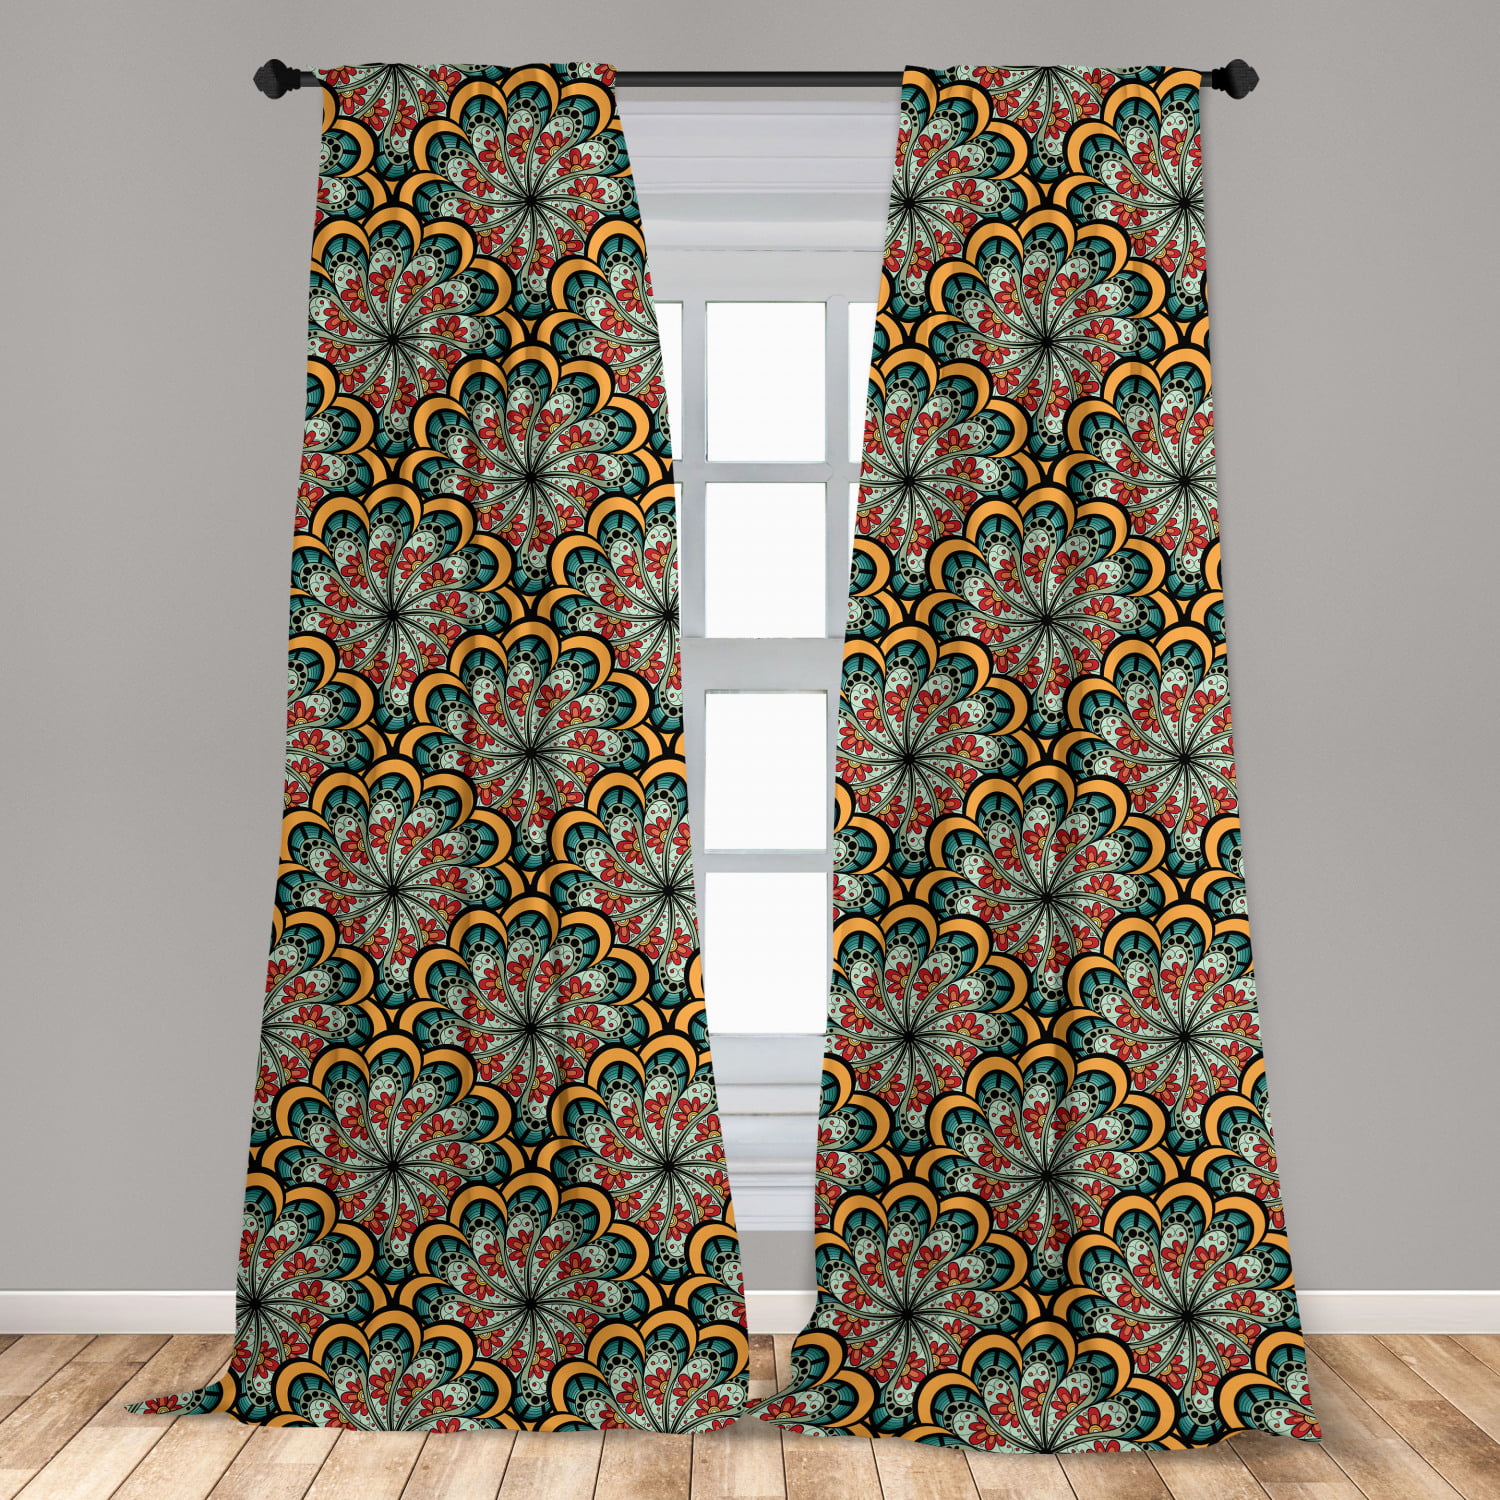 Grommet Window Curtains Colorful Flora Bohemian Mandala Print Paisley Pattern Grommet Top Bedroom and Living Room Curtains Set of 2 Window Curtain Panels,40 x 63 Inch